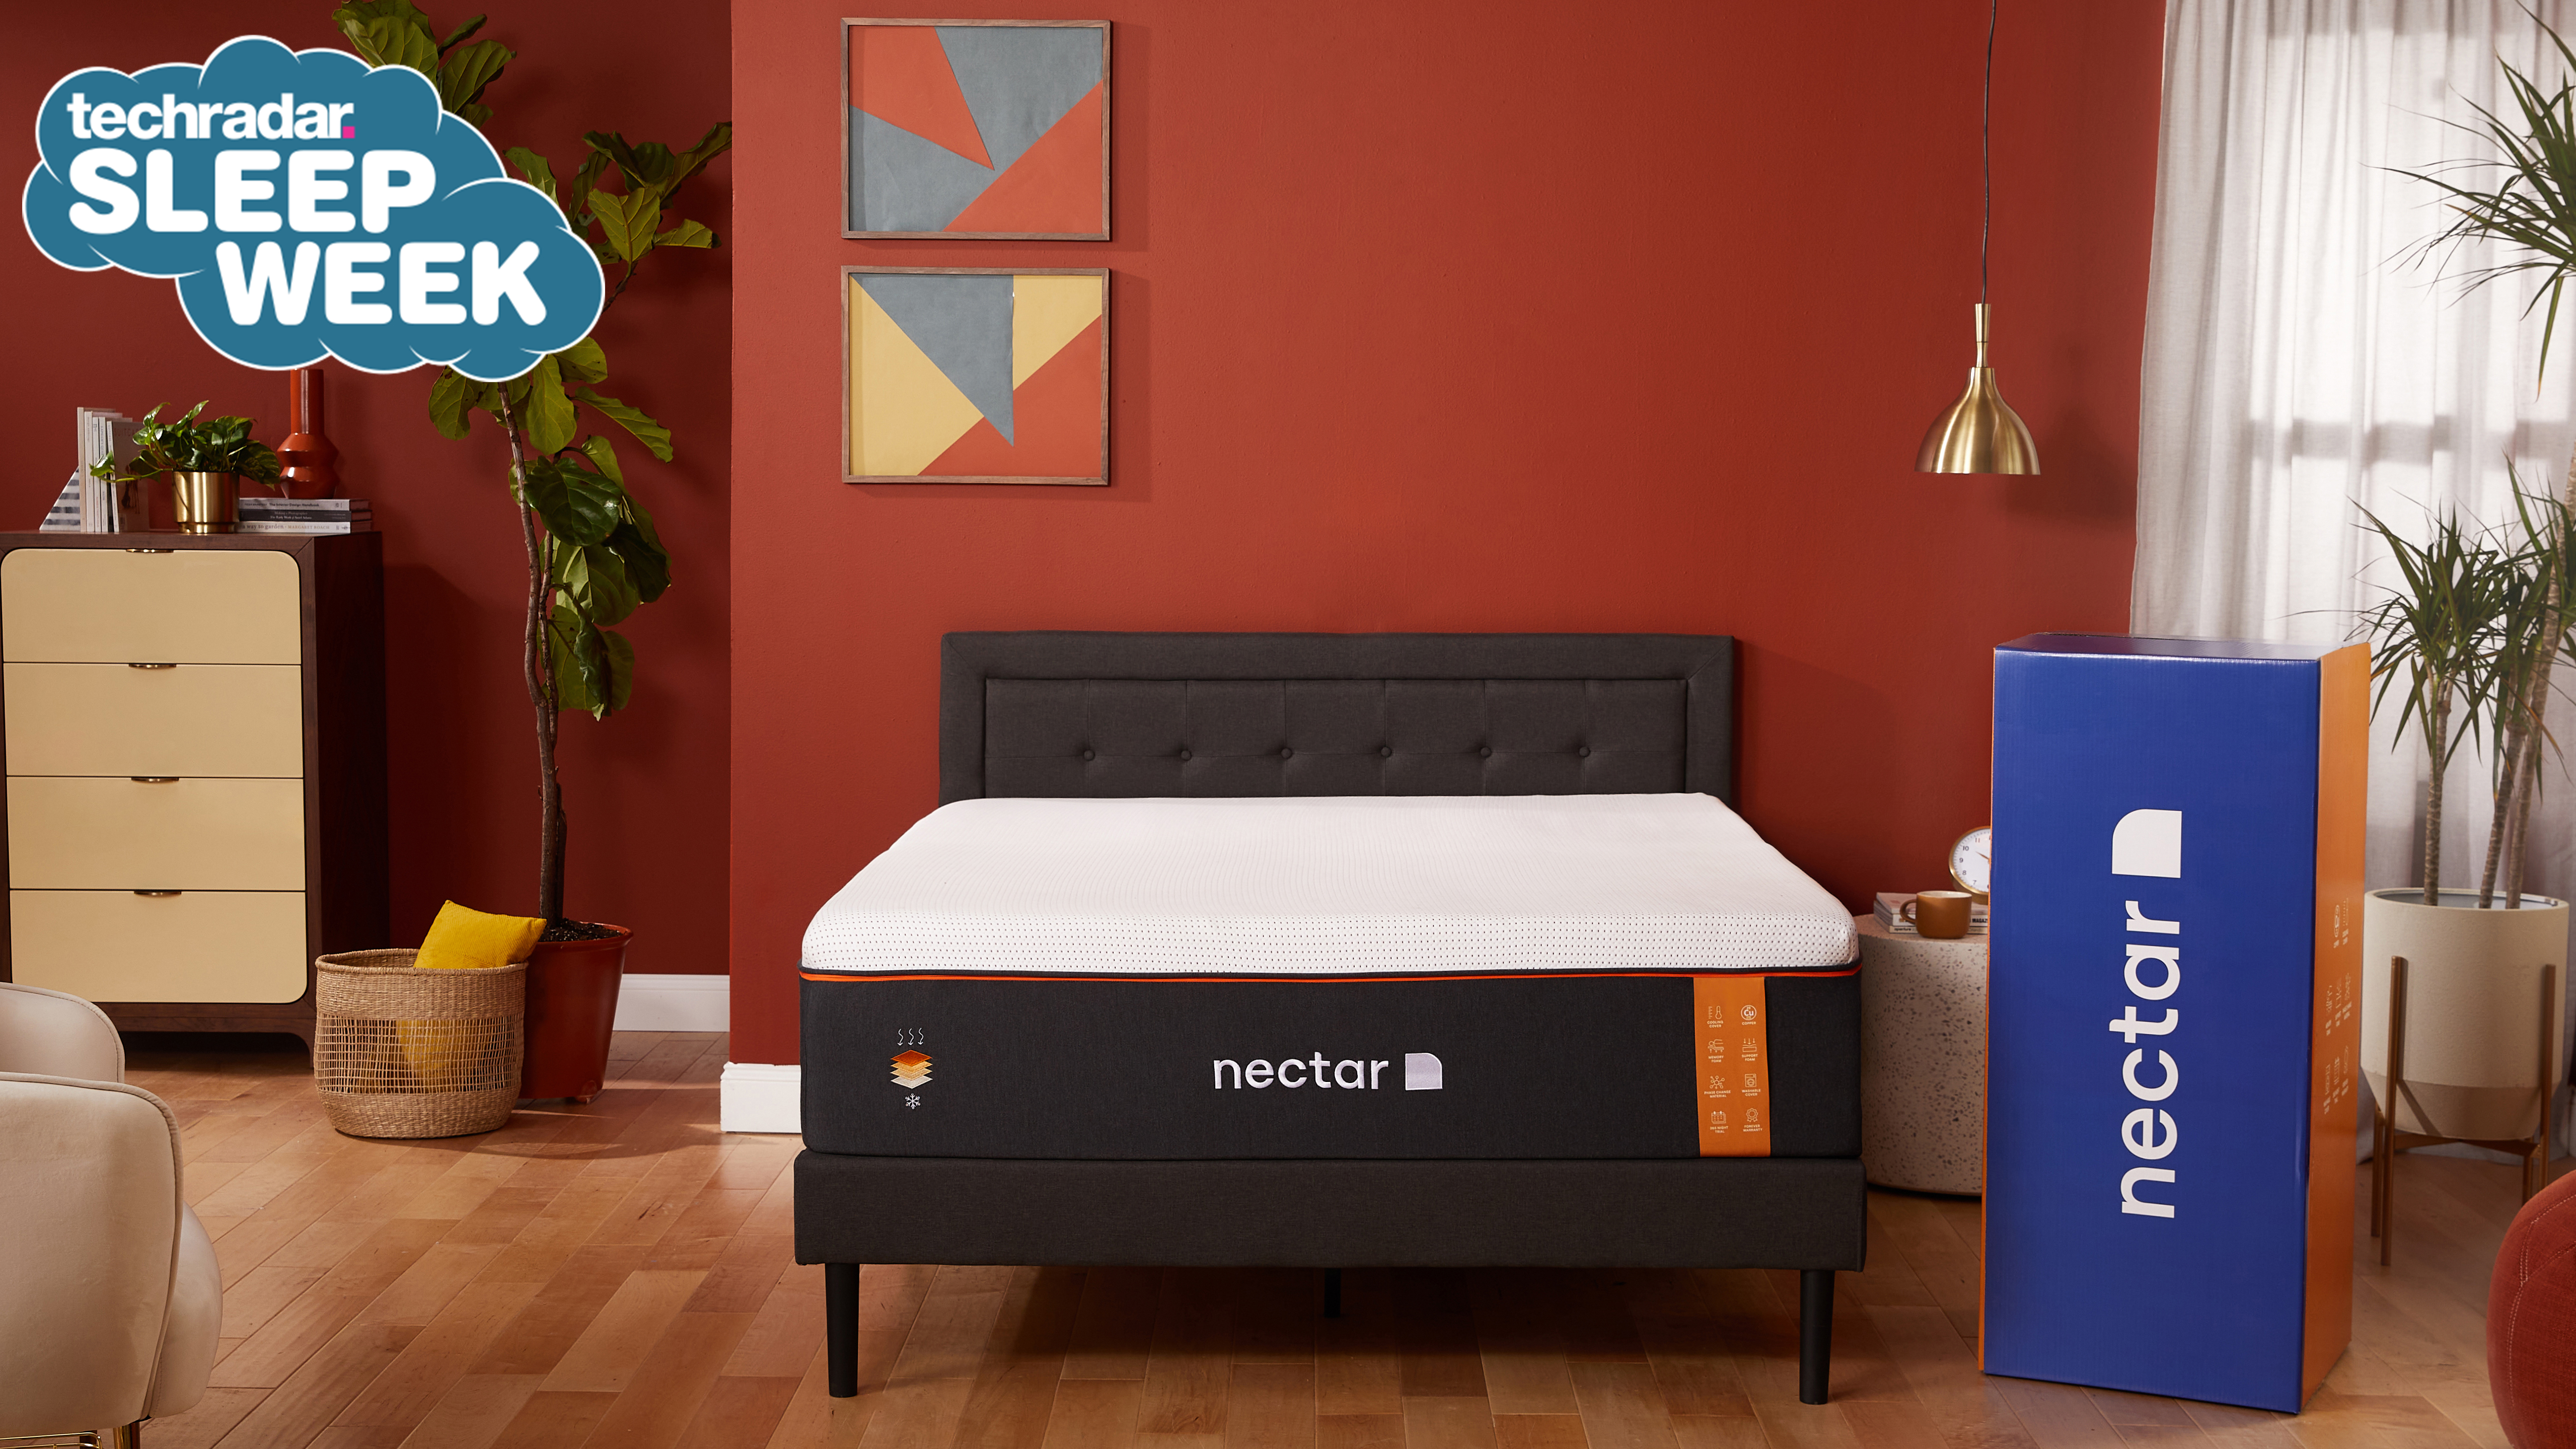 The Nectar Premier Copper Mattress on a wooden bed in a red bedroom